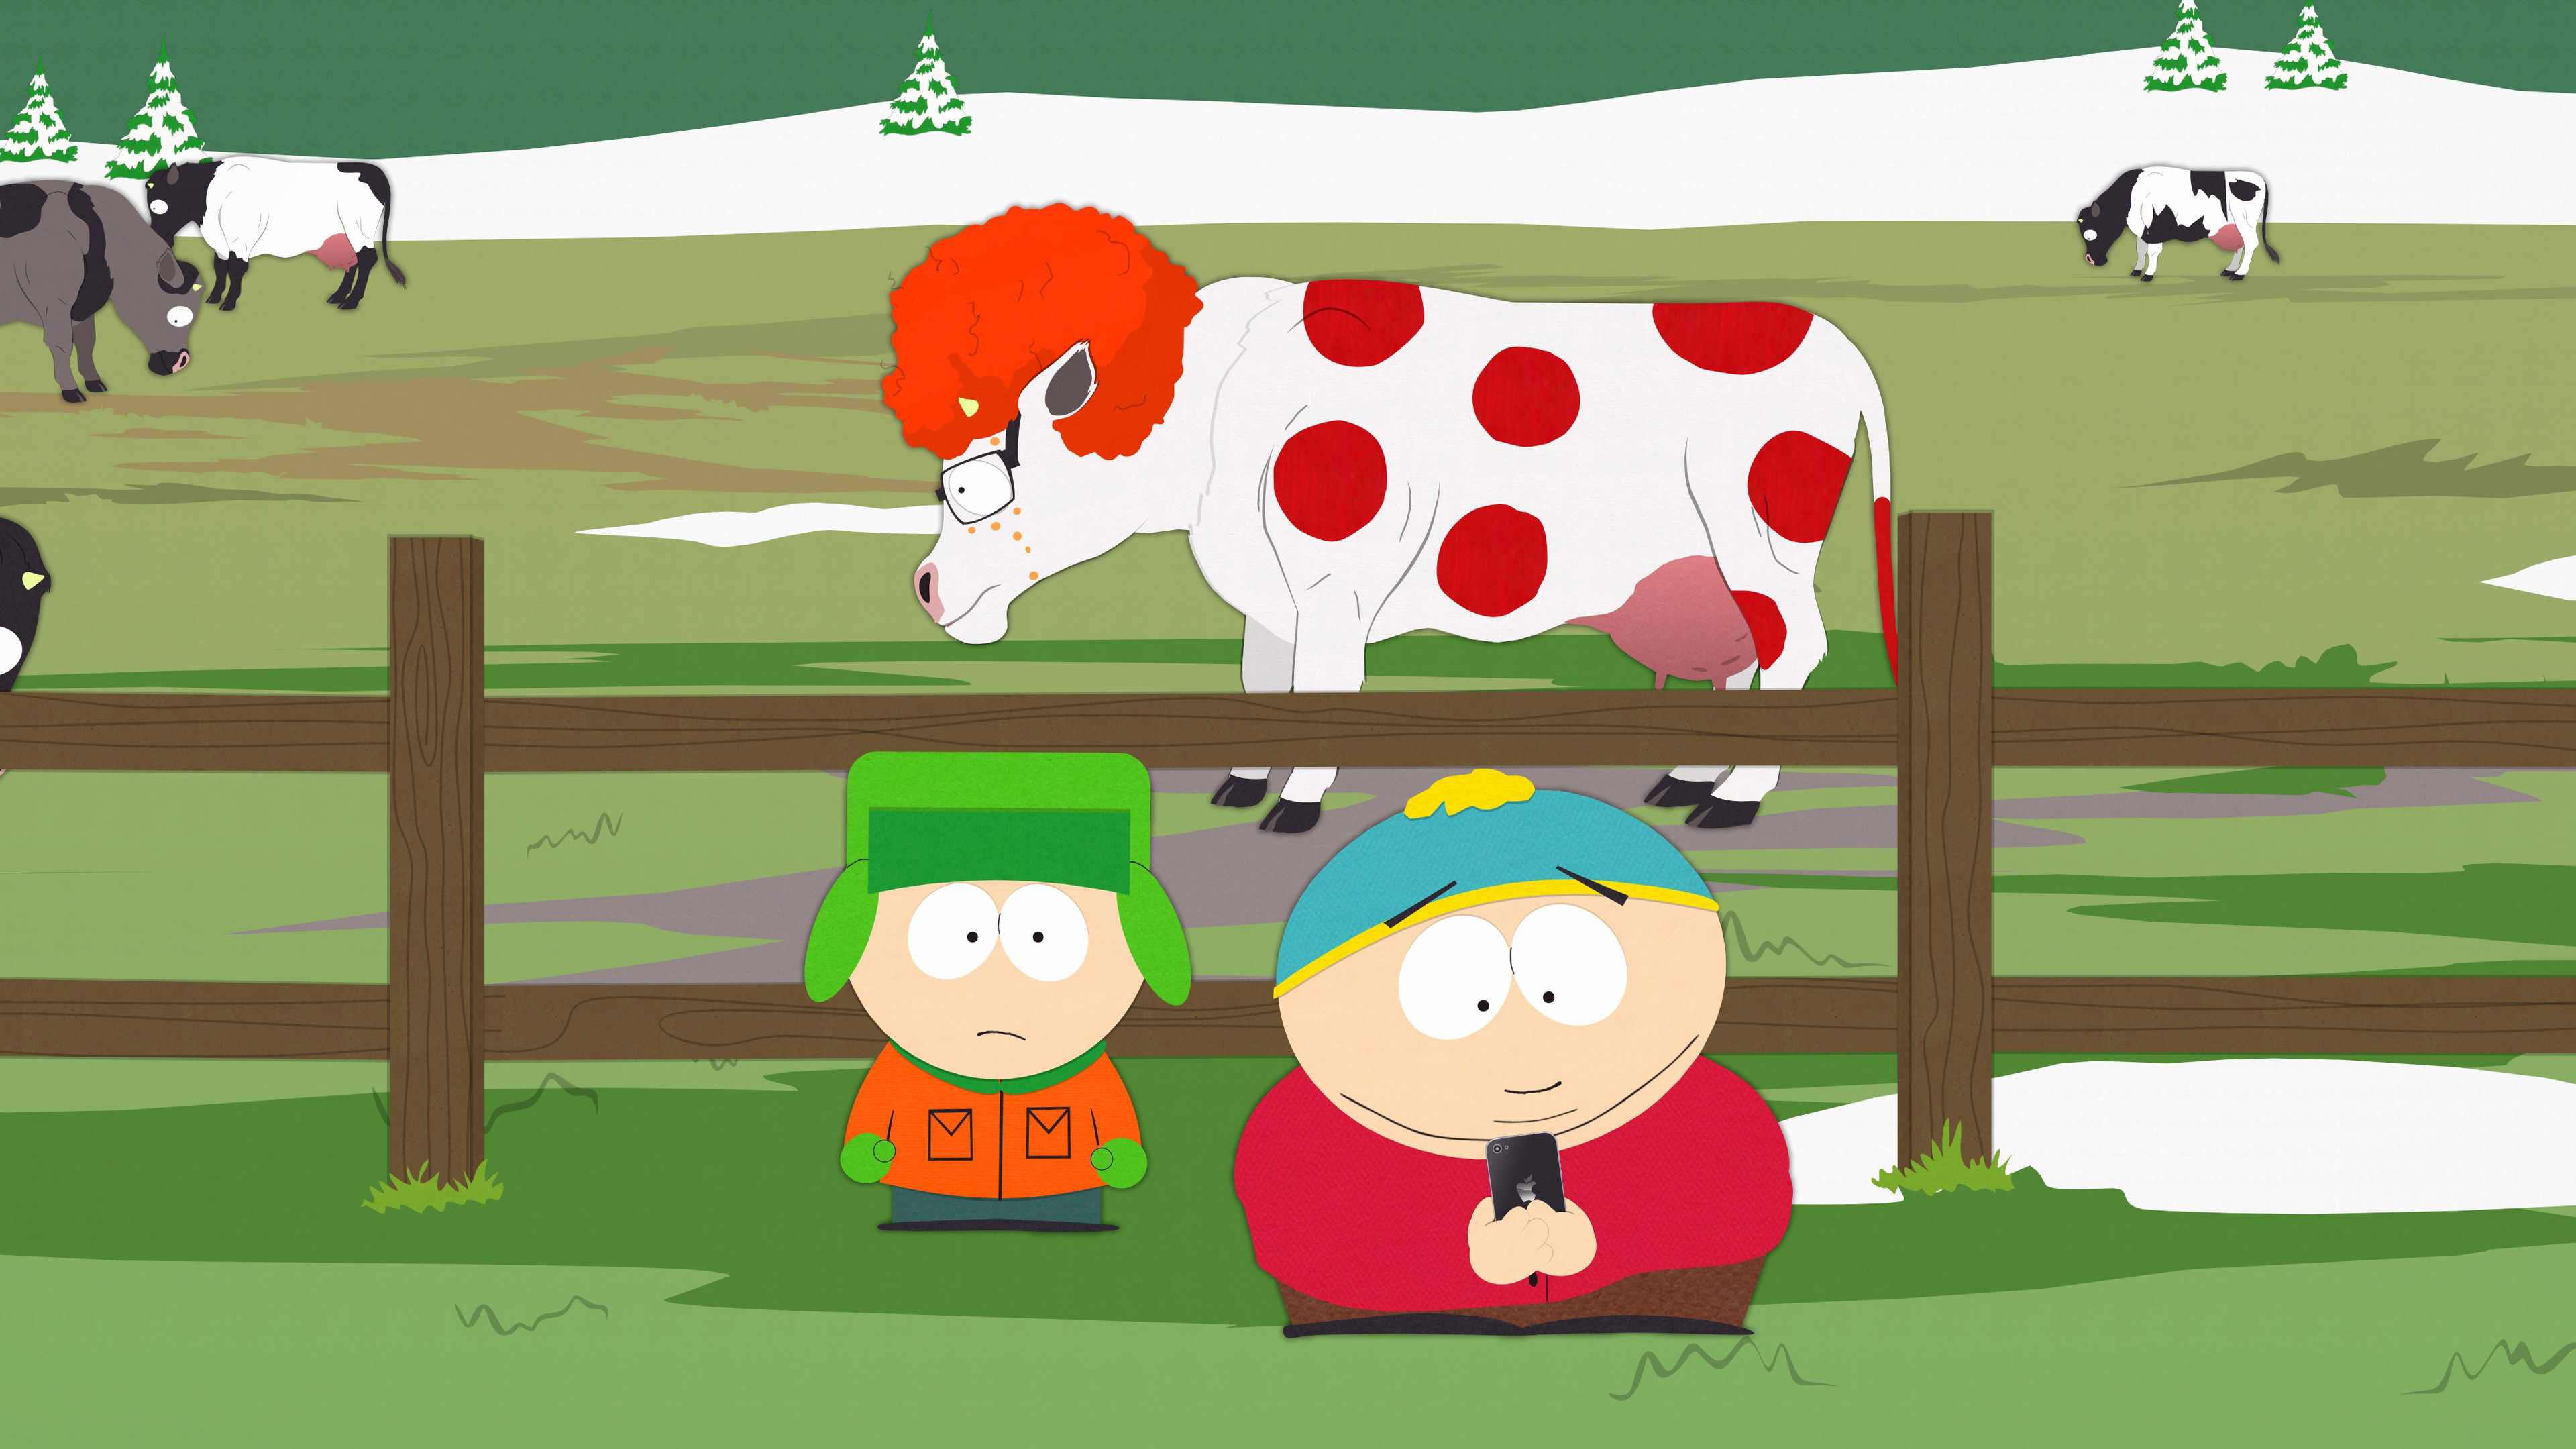 South Park Wallpapers HD A19